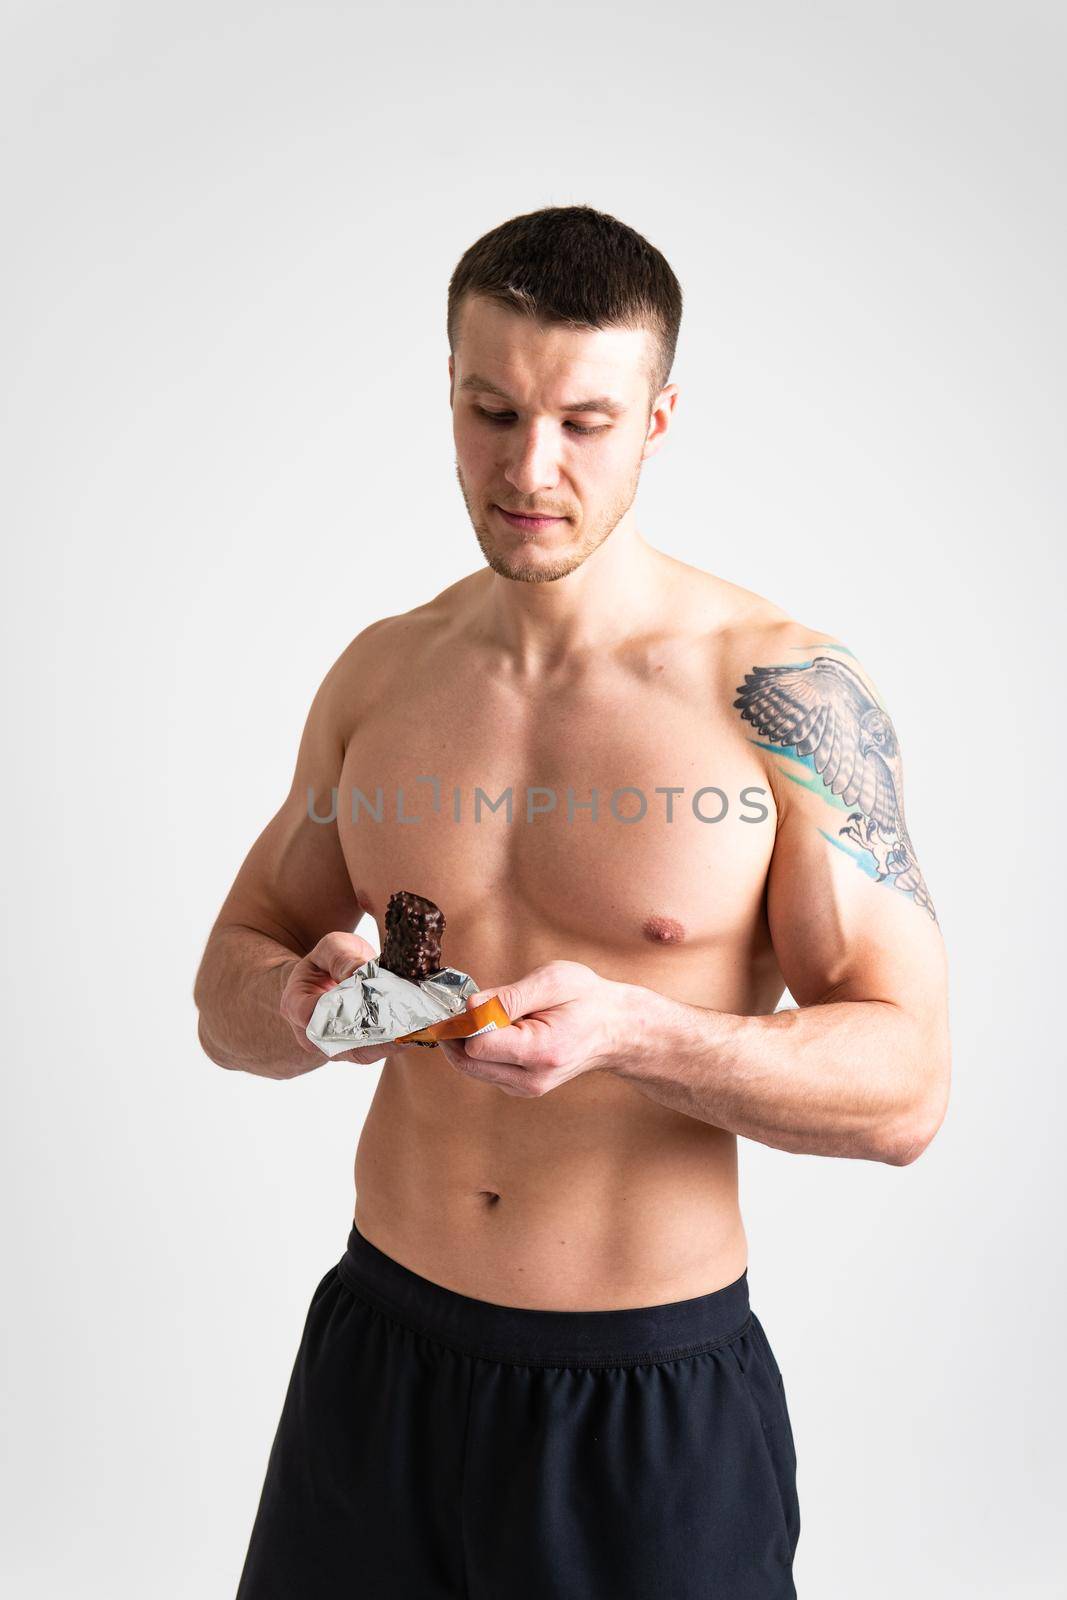 Man eats protein bar on white background isolated bar snack eat, taste health energetic outdoor ABS, cereal female